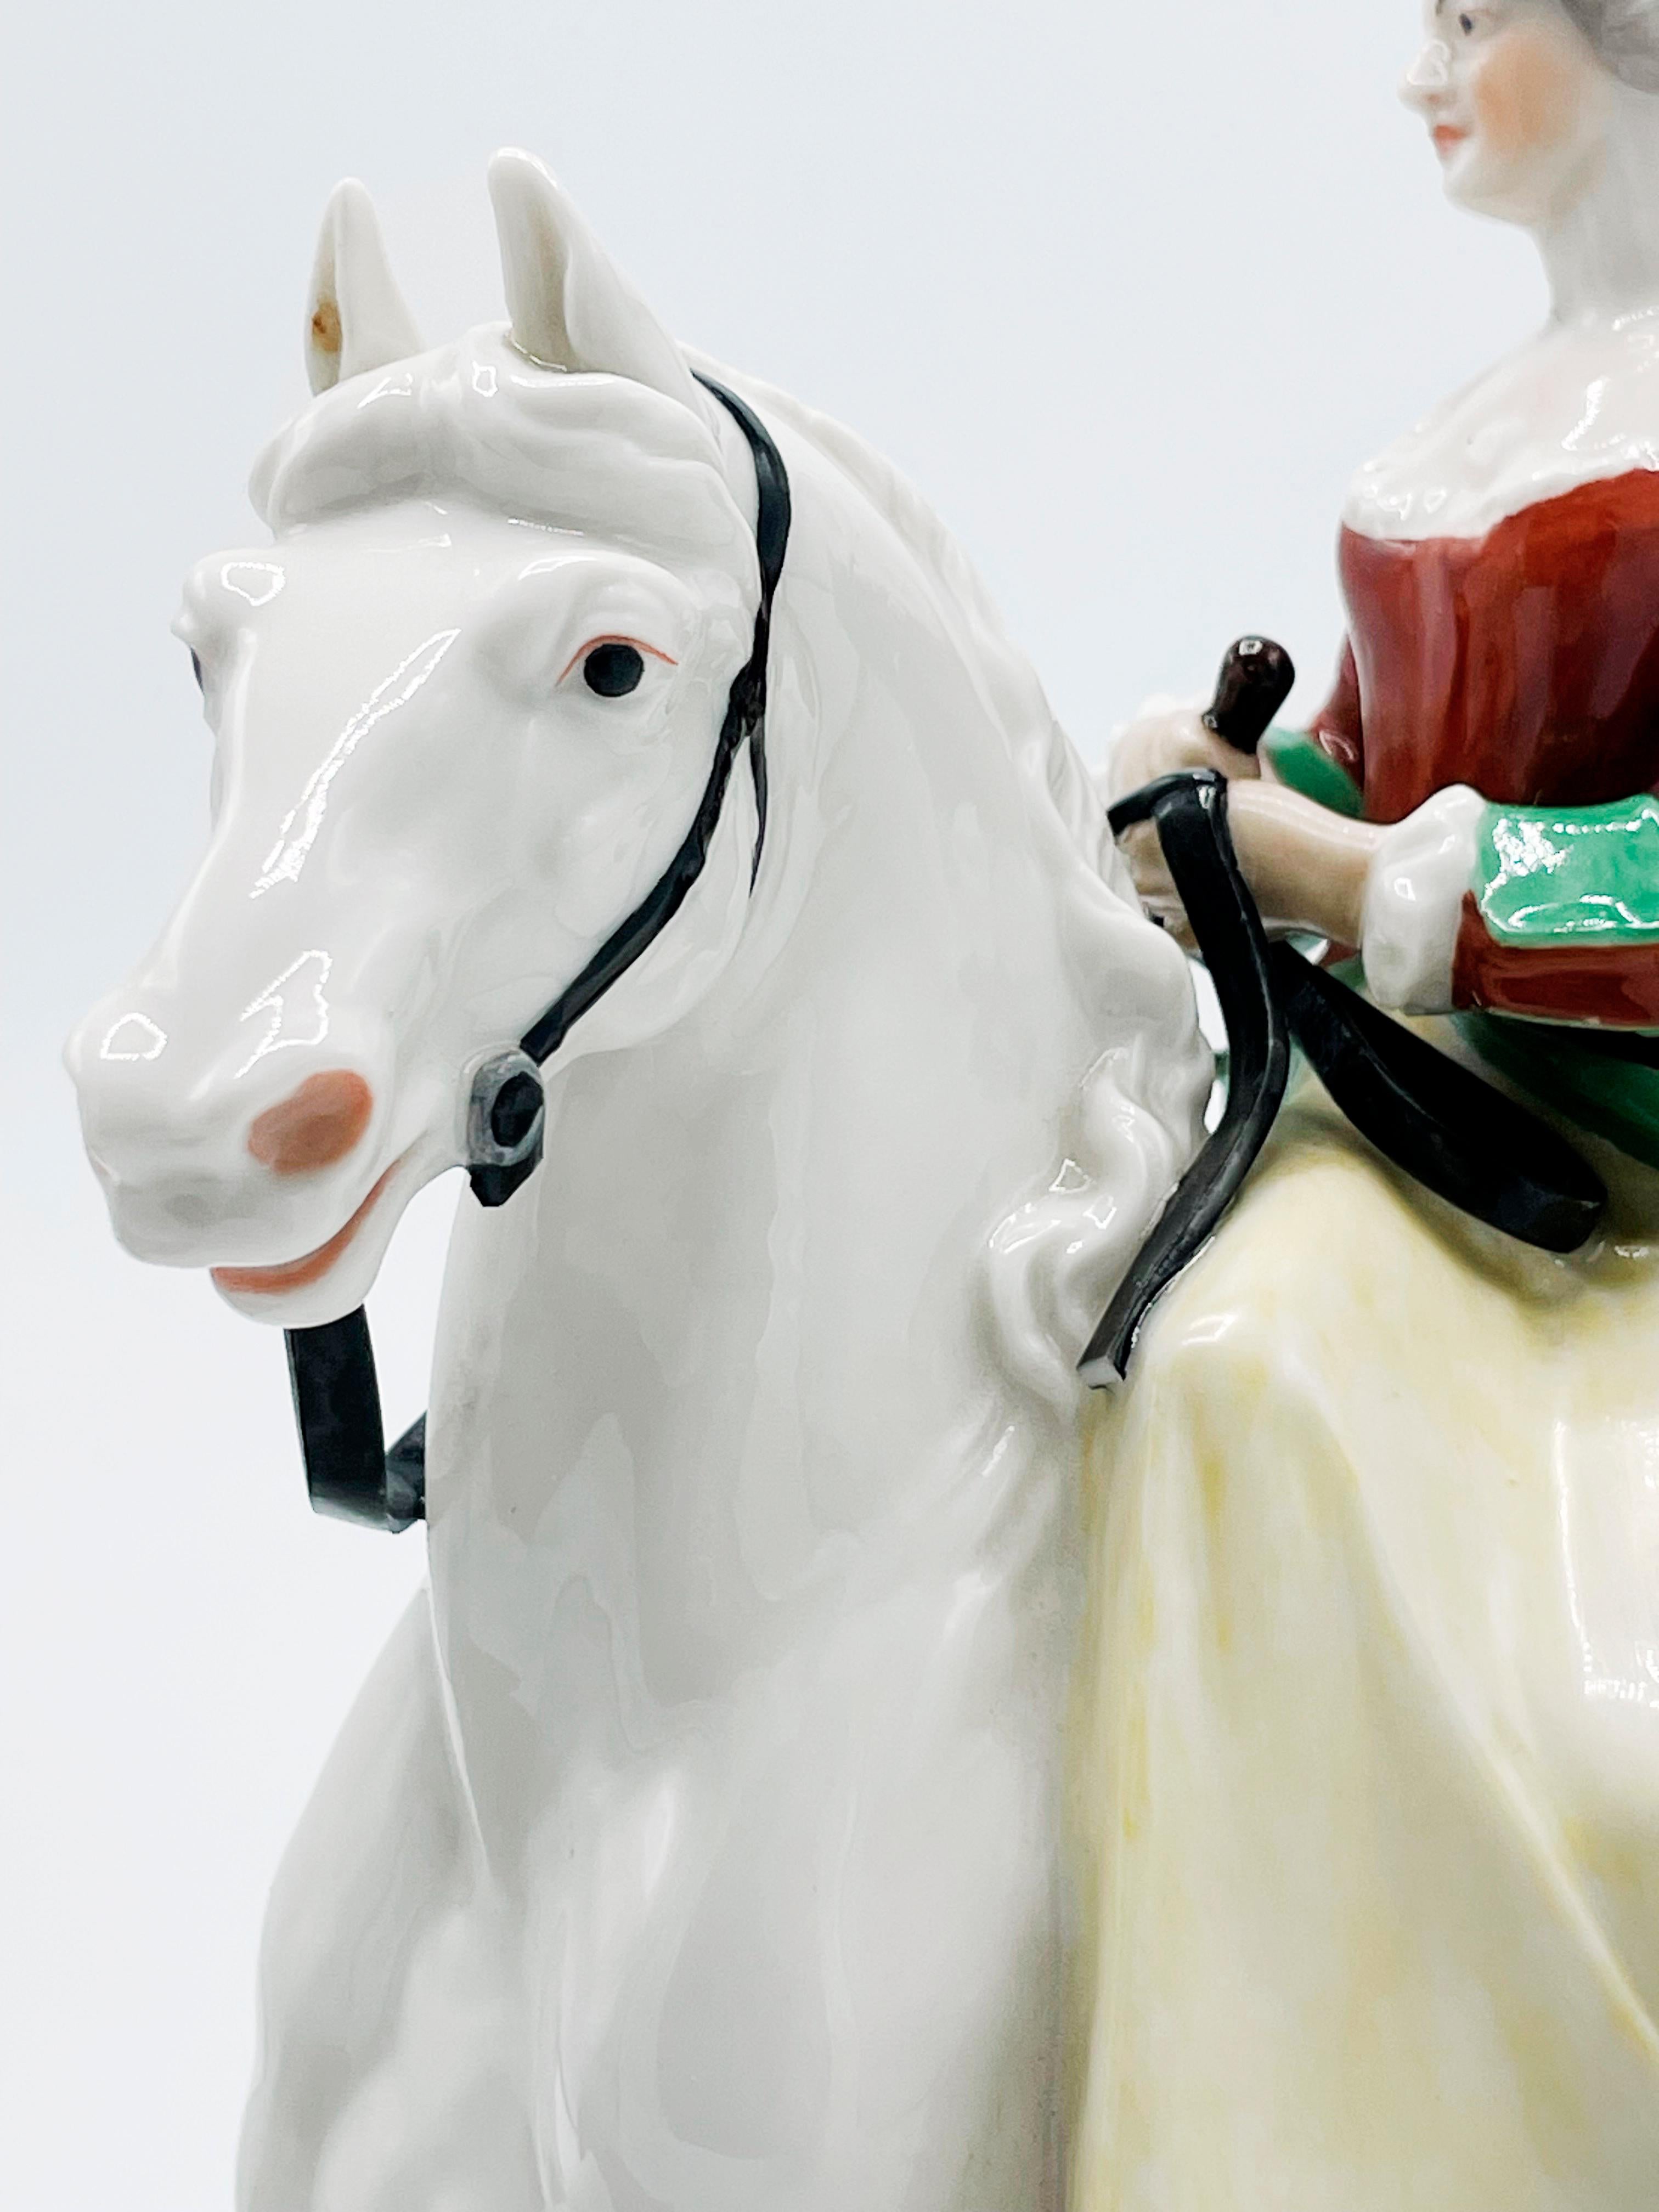 Hand-Painted Theodor Kärner figure Hunting rider pincess MARGARETHE V. Thurn and Taxis. For Sale